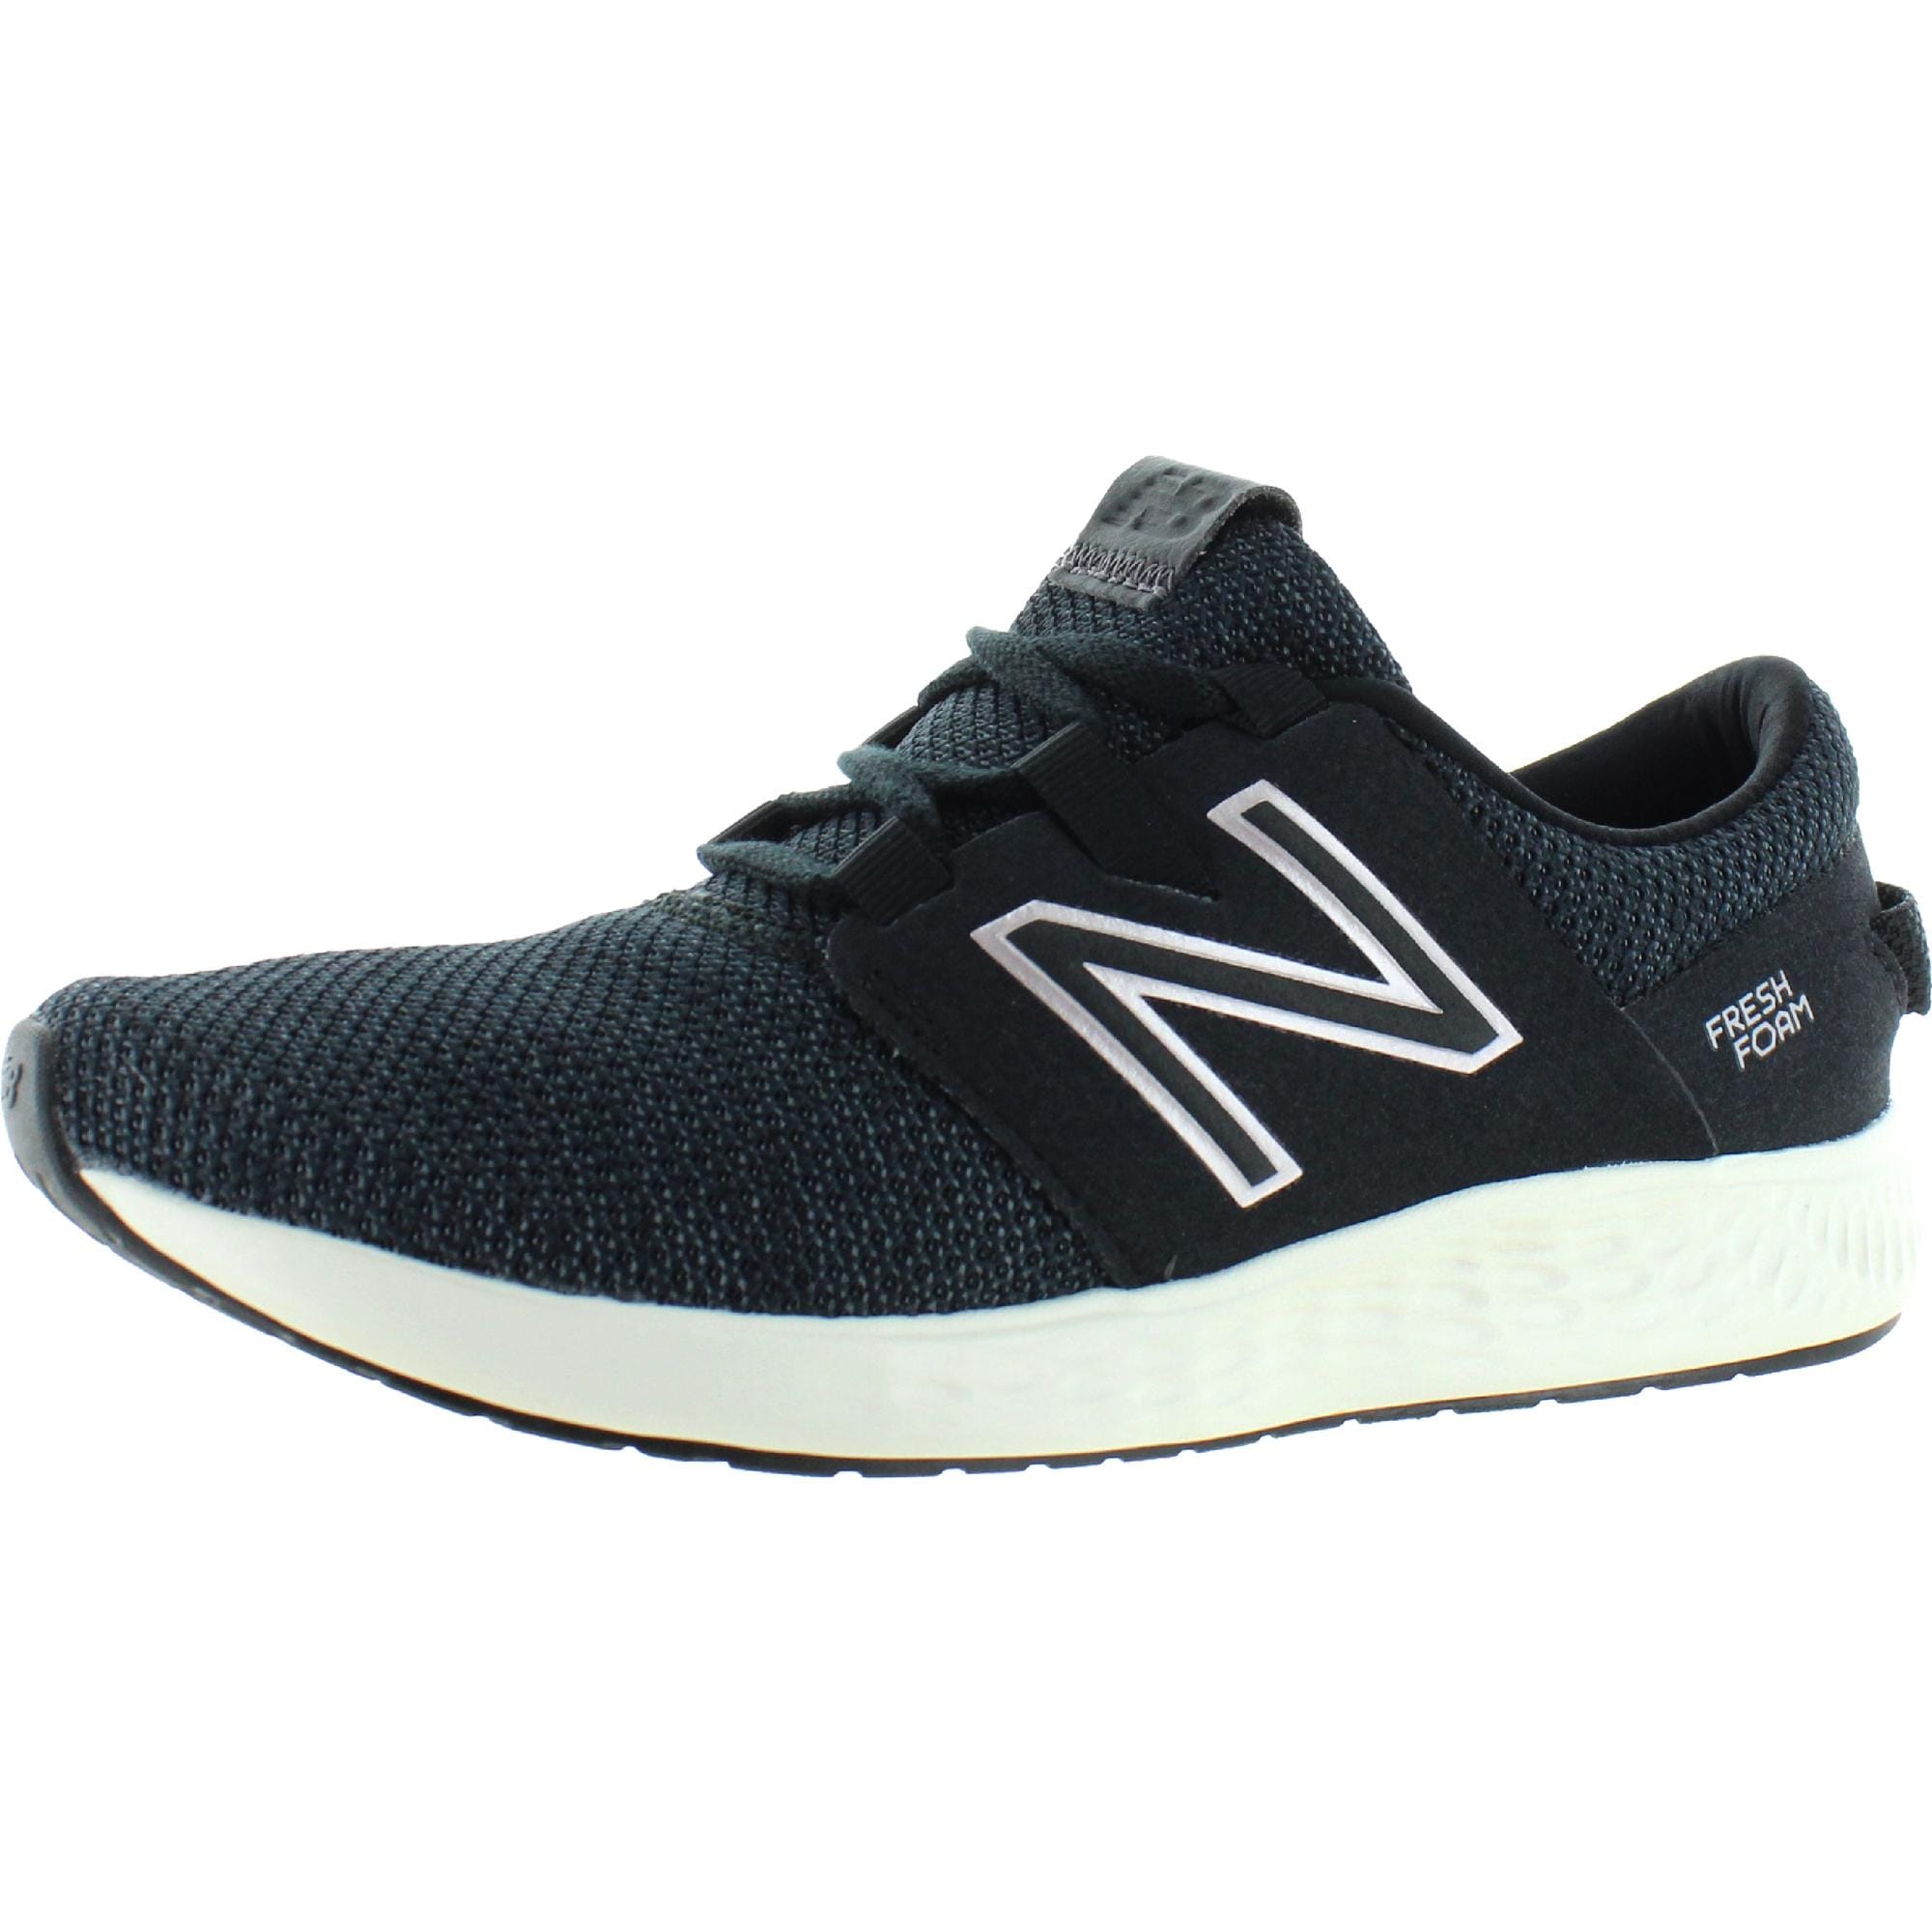 new balance trainers black and white